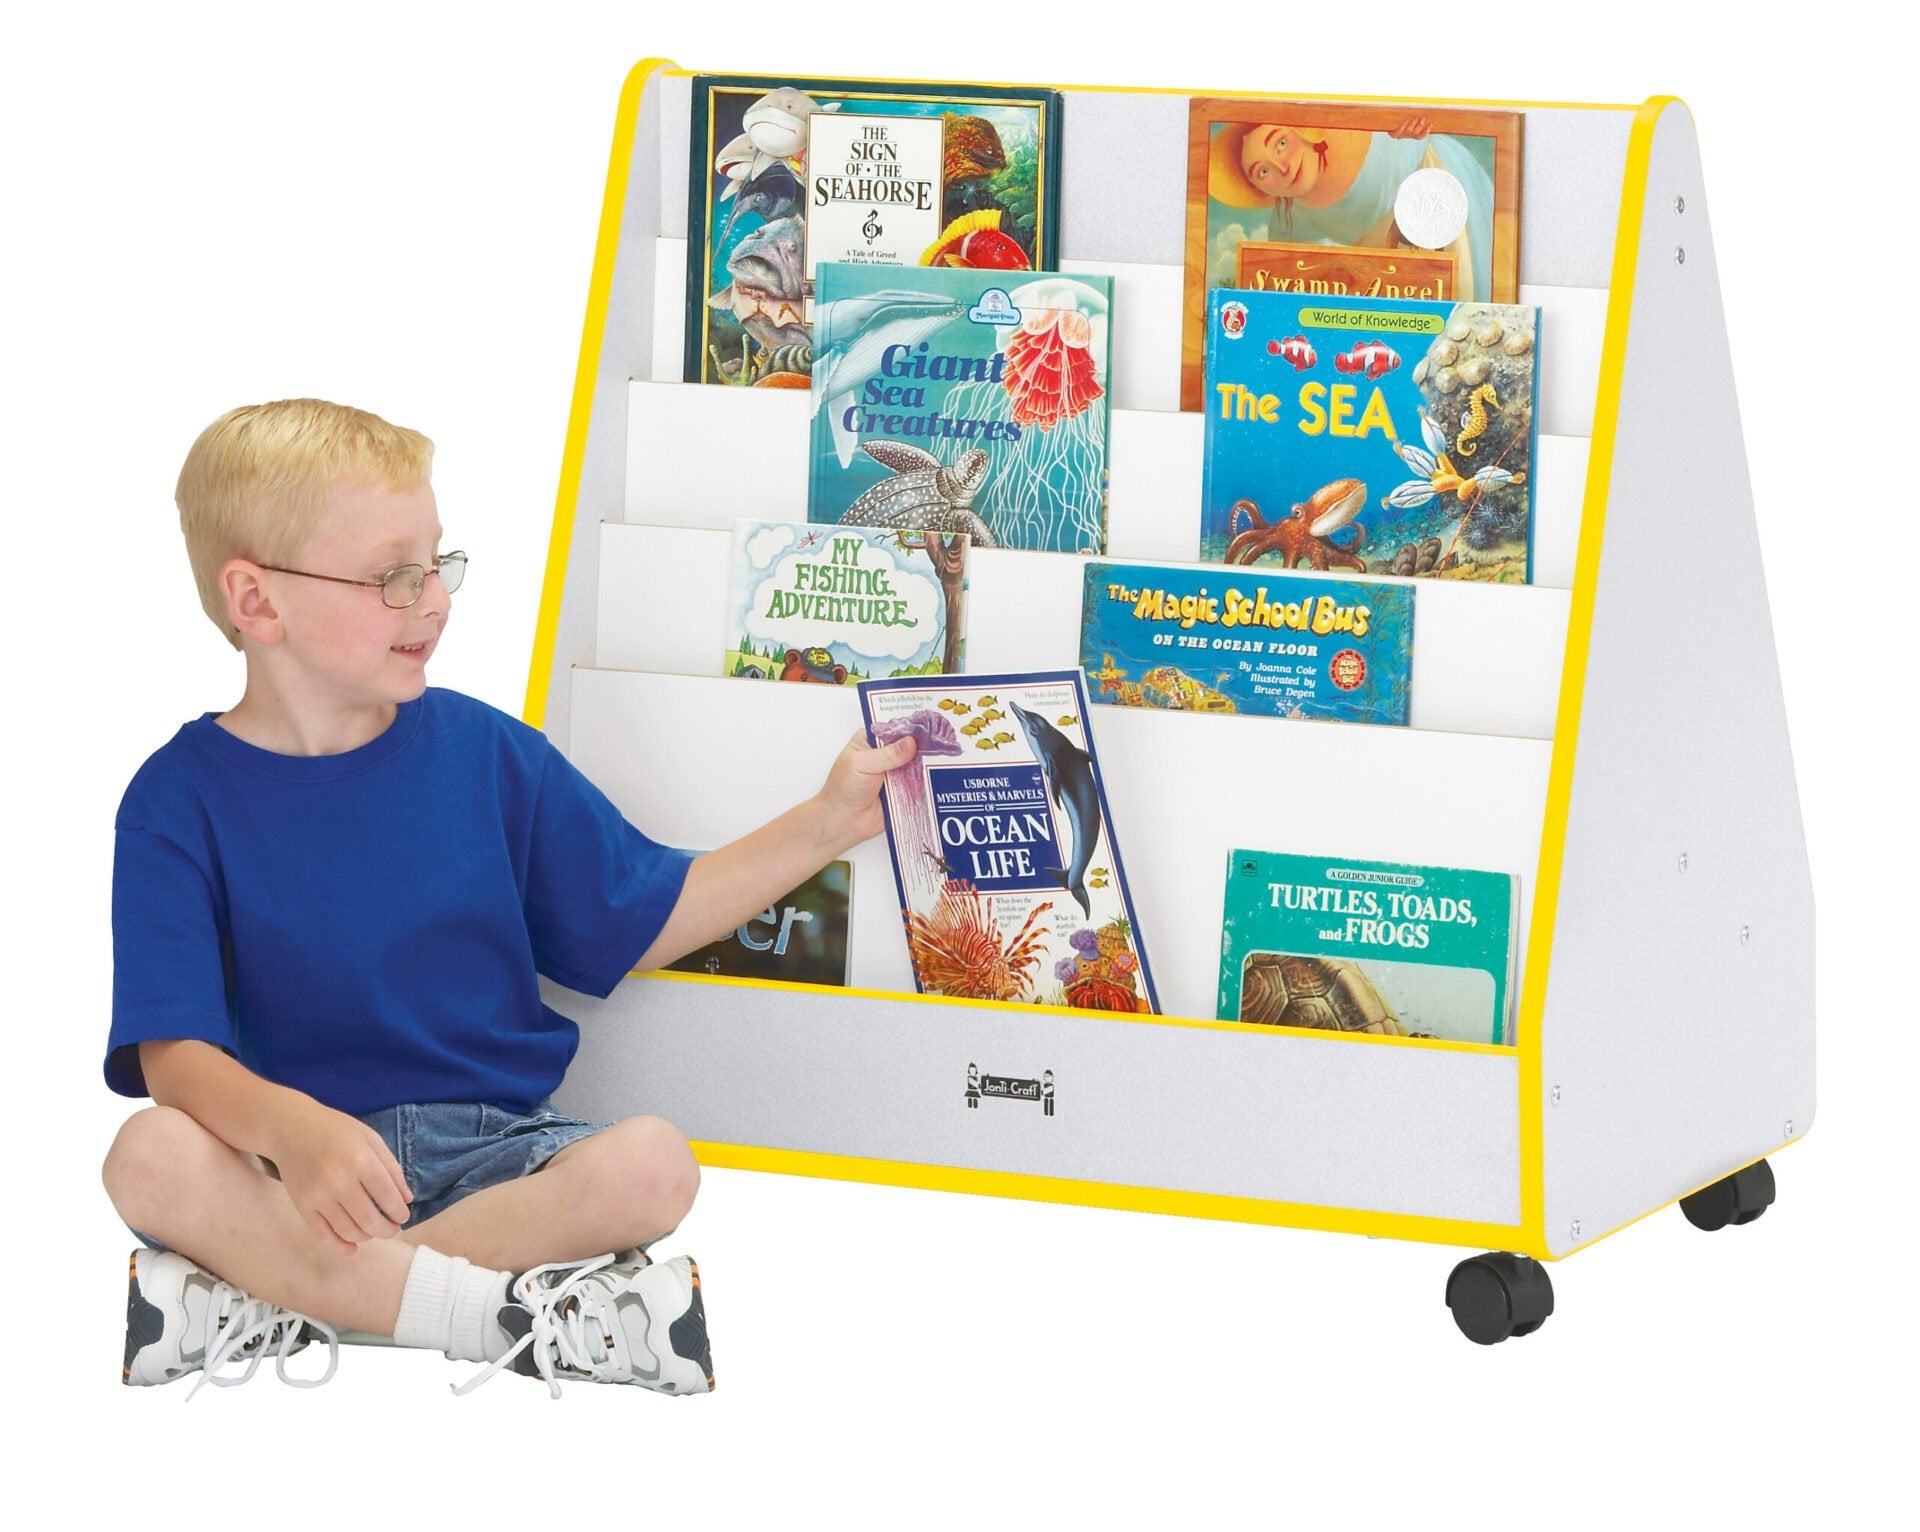 Rainbow AccentsÂ® Pick-a-Book Stand - Mobile - Navy